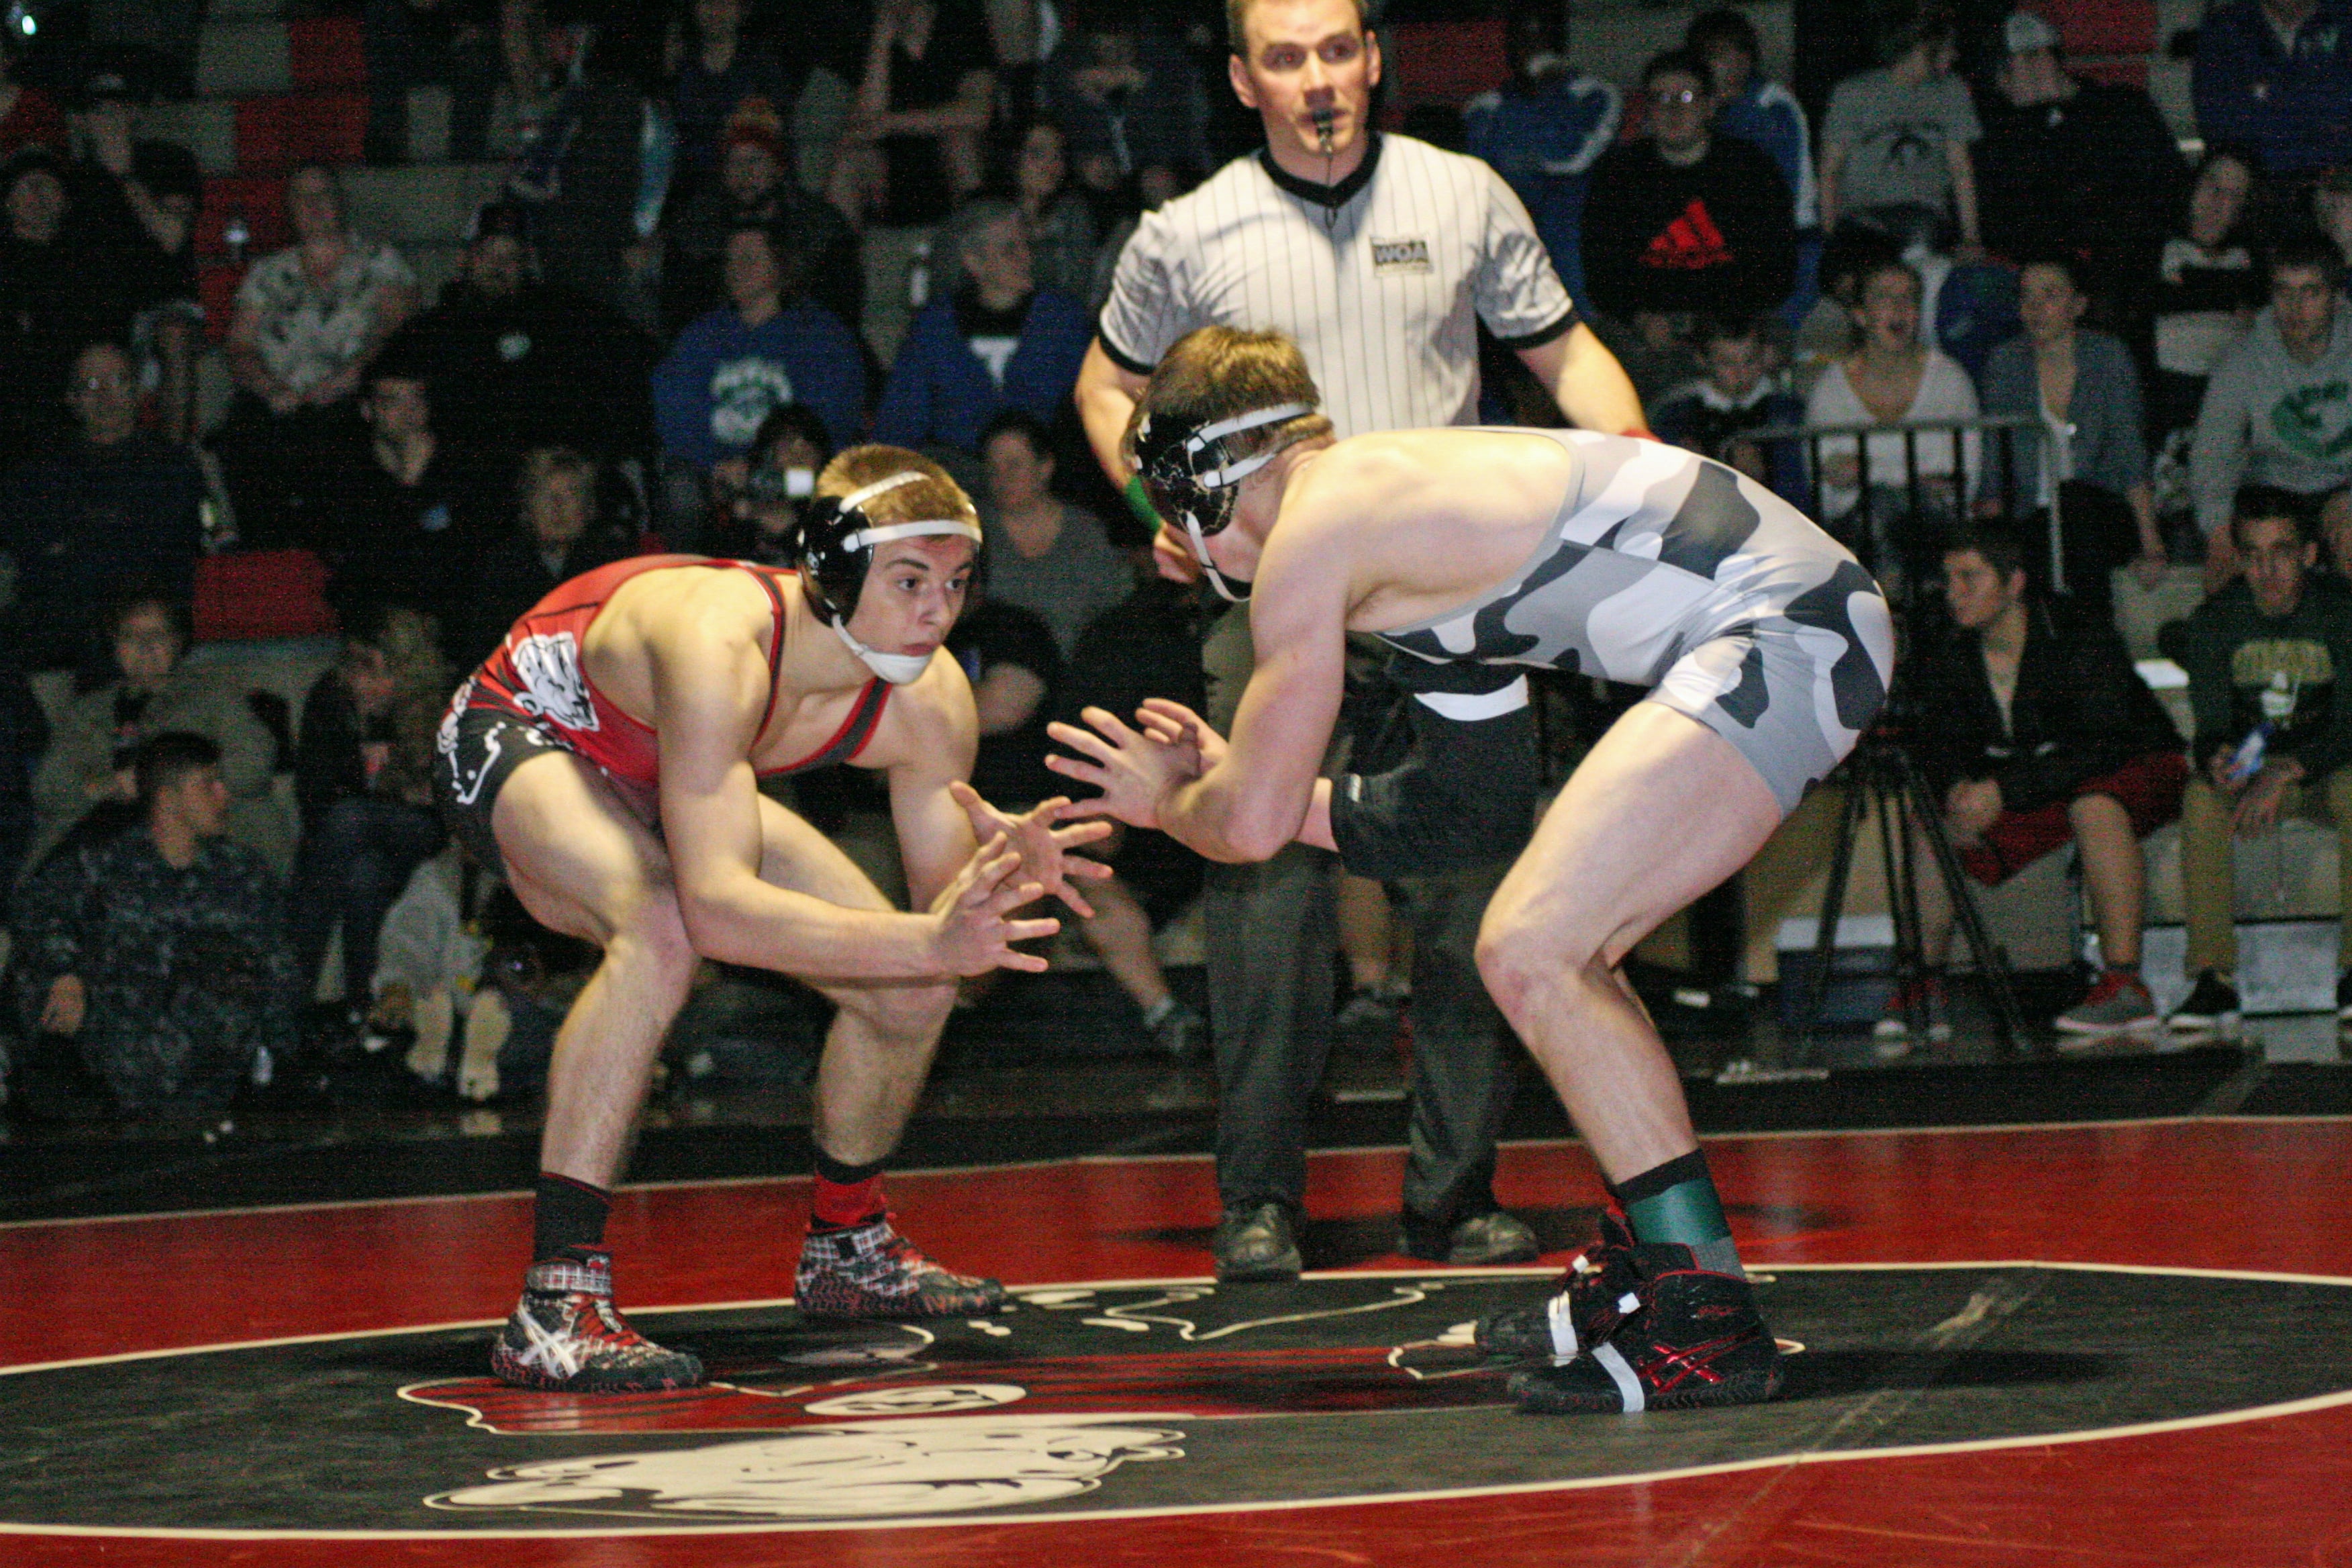 Bryant Elliott faces Tommy Strassenberg for the 145-pound 4A district championship.